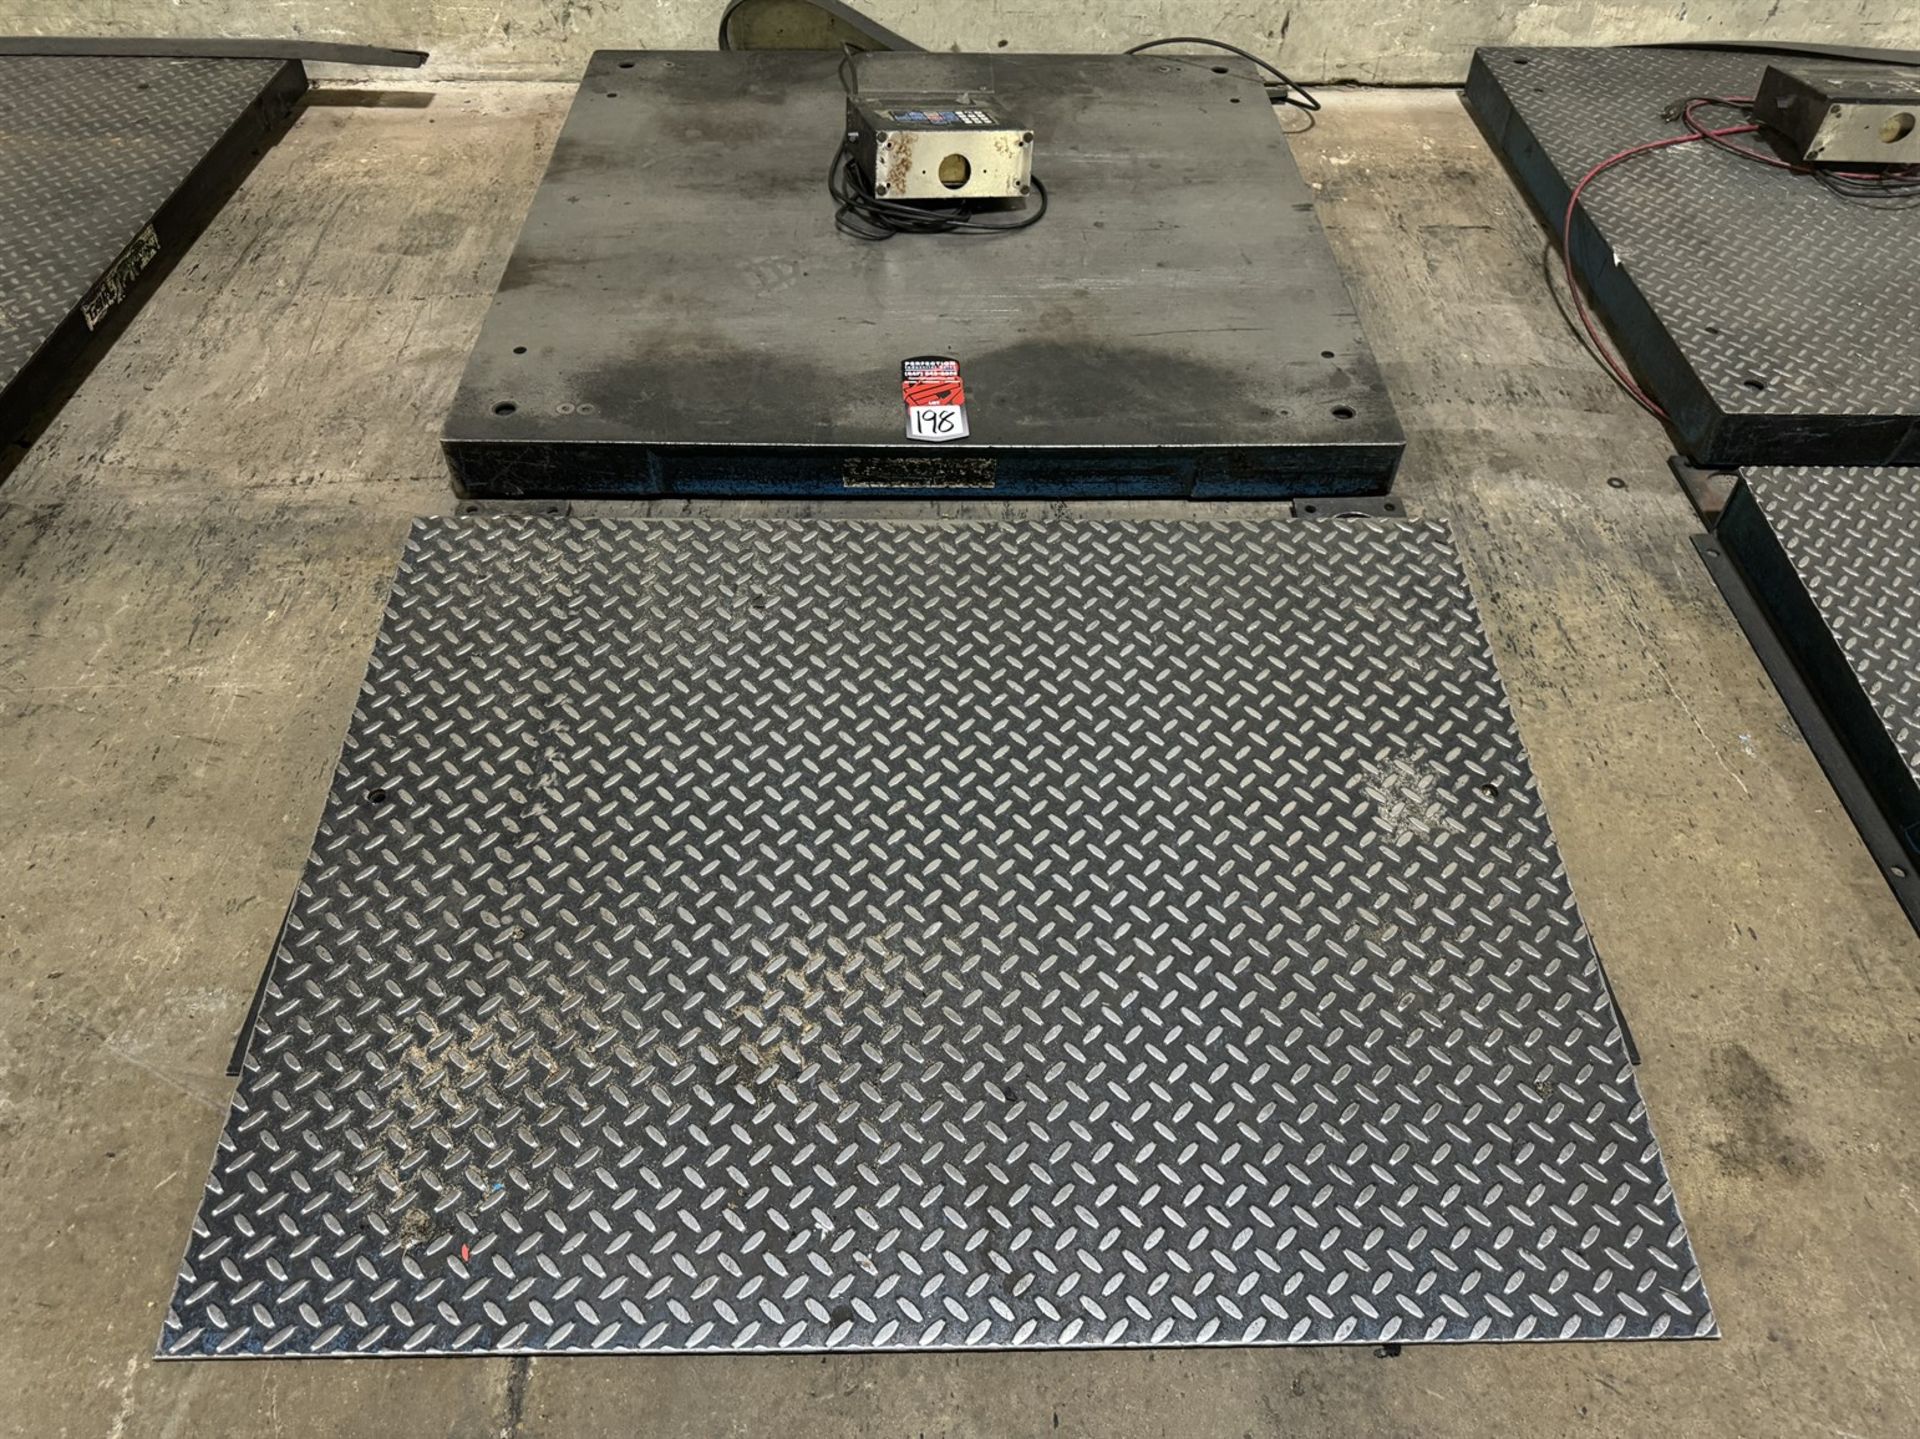 GSE 4' x 4' Floor Scale w/ Ramp and GSE 4600 Digital Scale, 5000 Lb. Capacity - Image 2 of 4